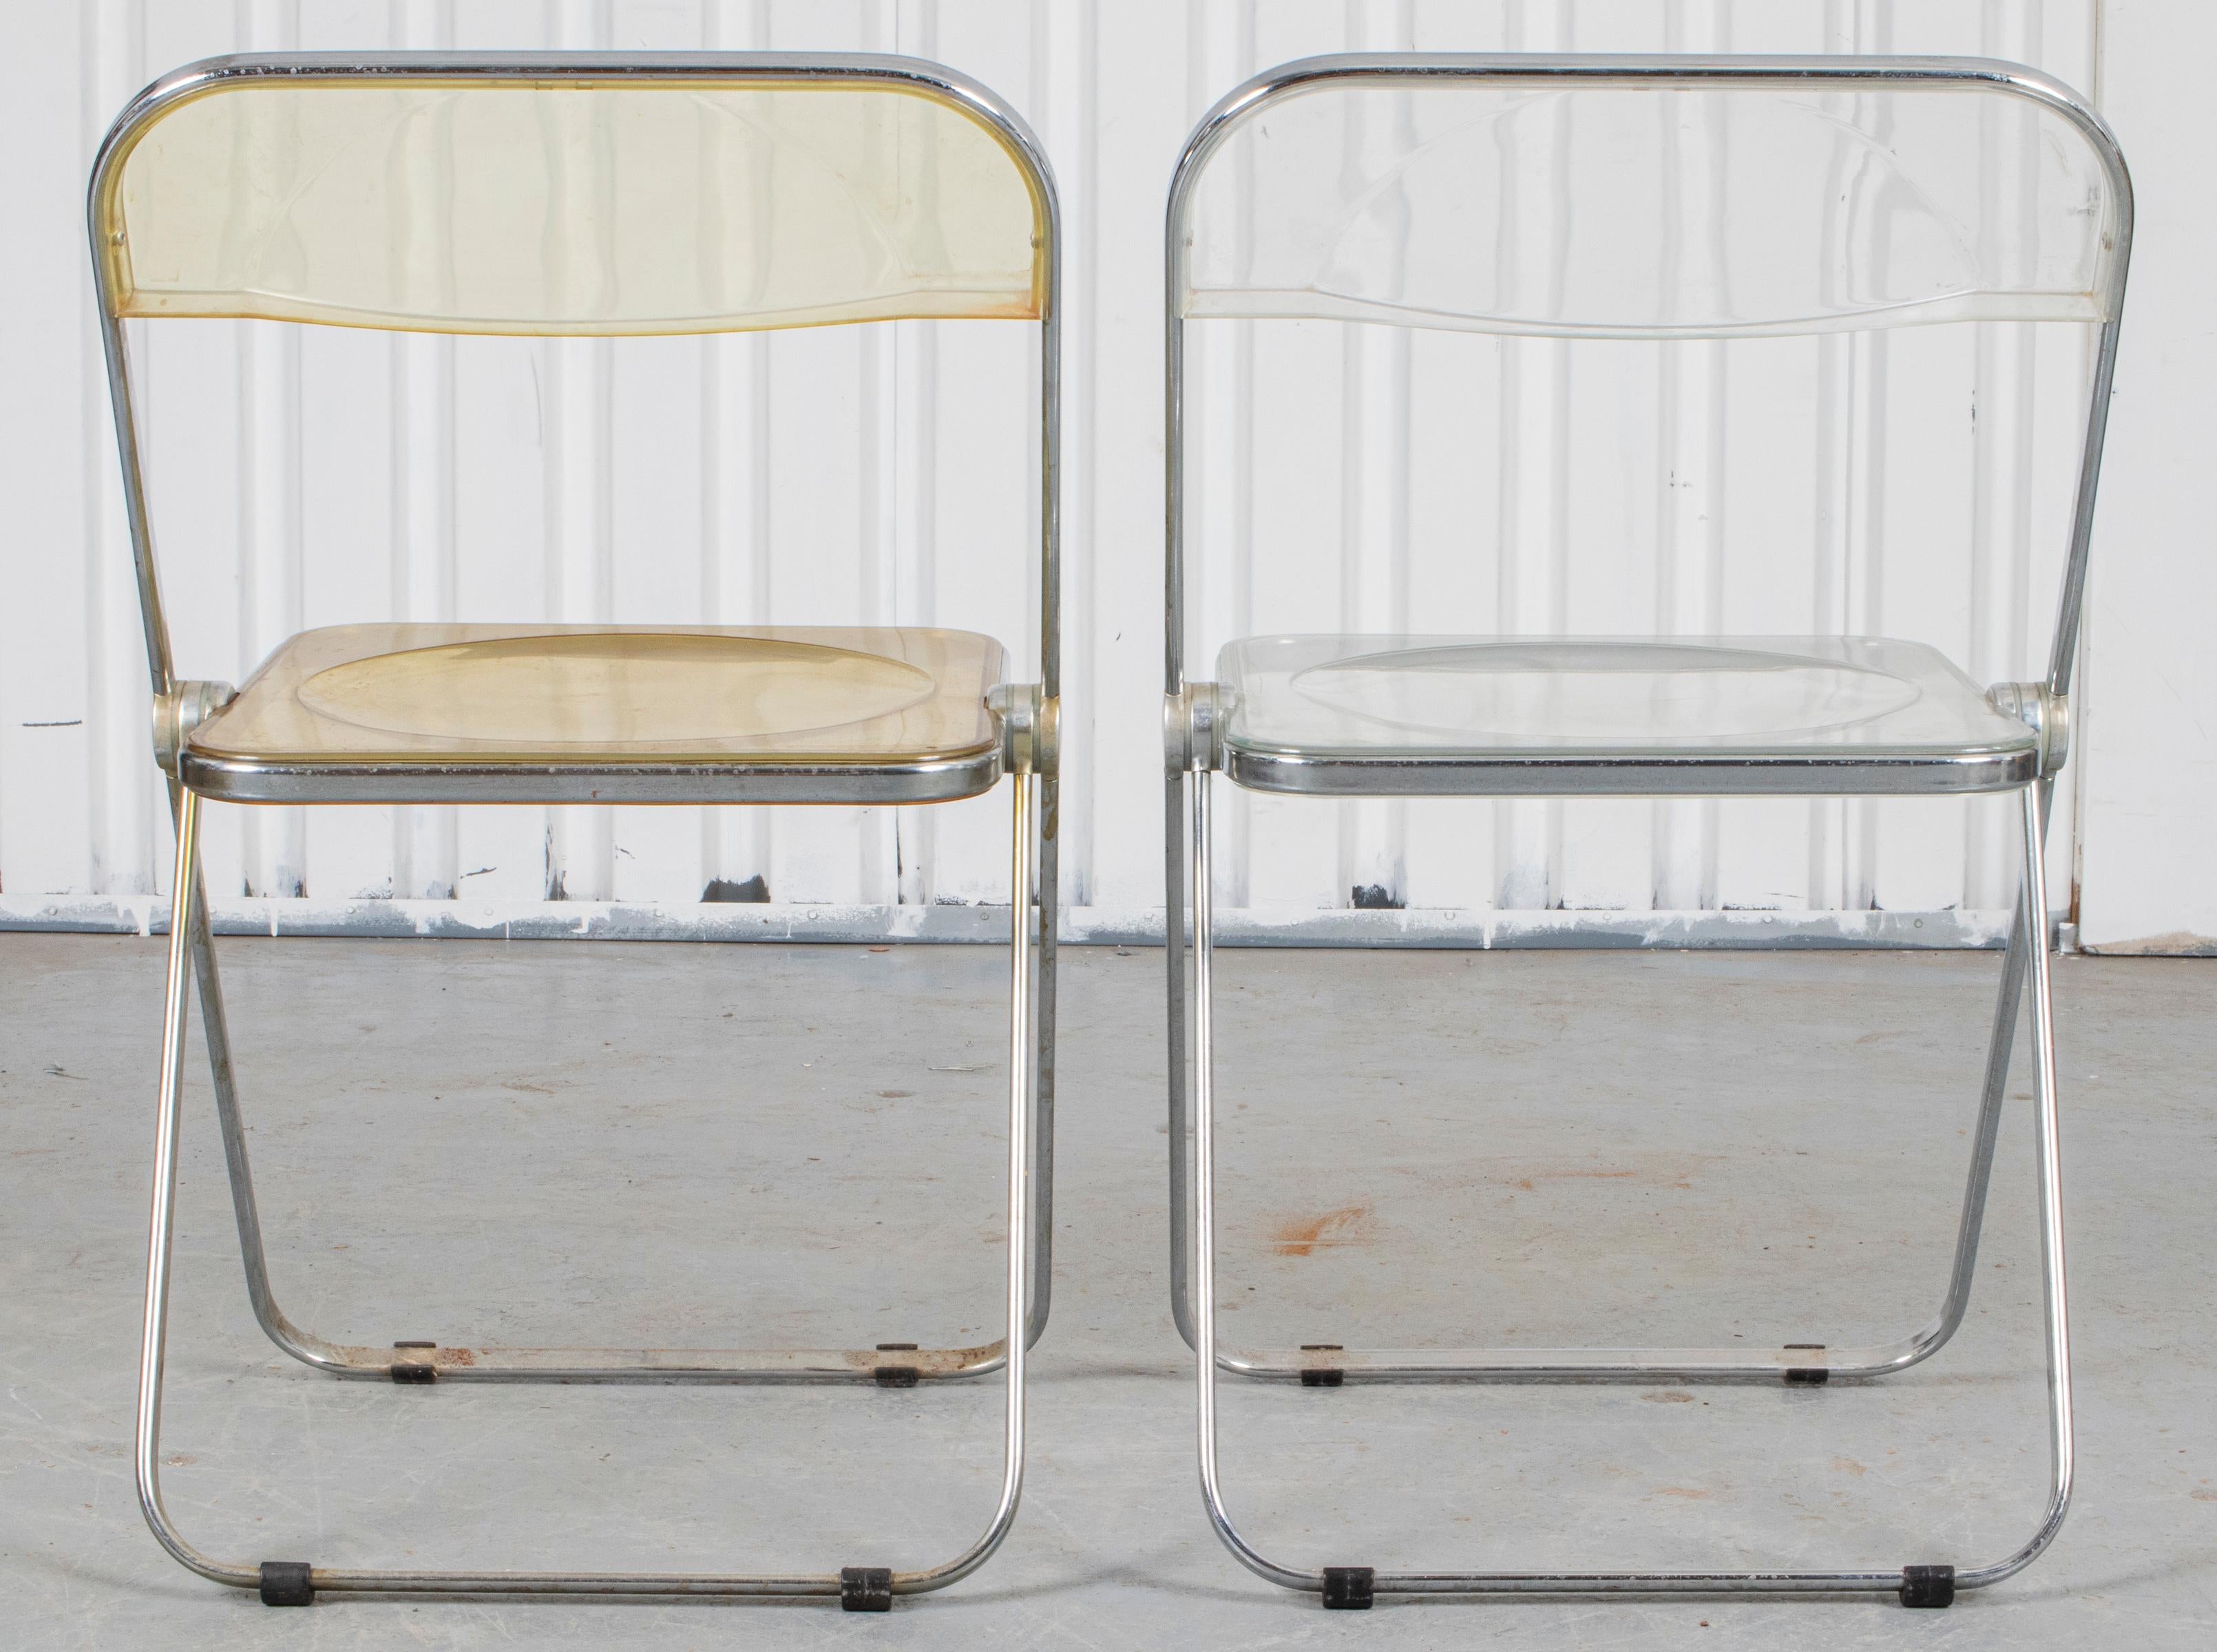 Piretti Castelli Lucite 'Plia ' Folding Chairs, 4 In Good Condition For Sale In New York, NY